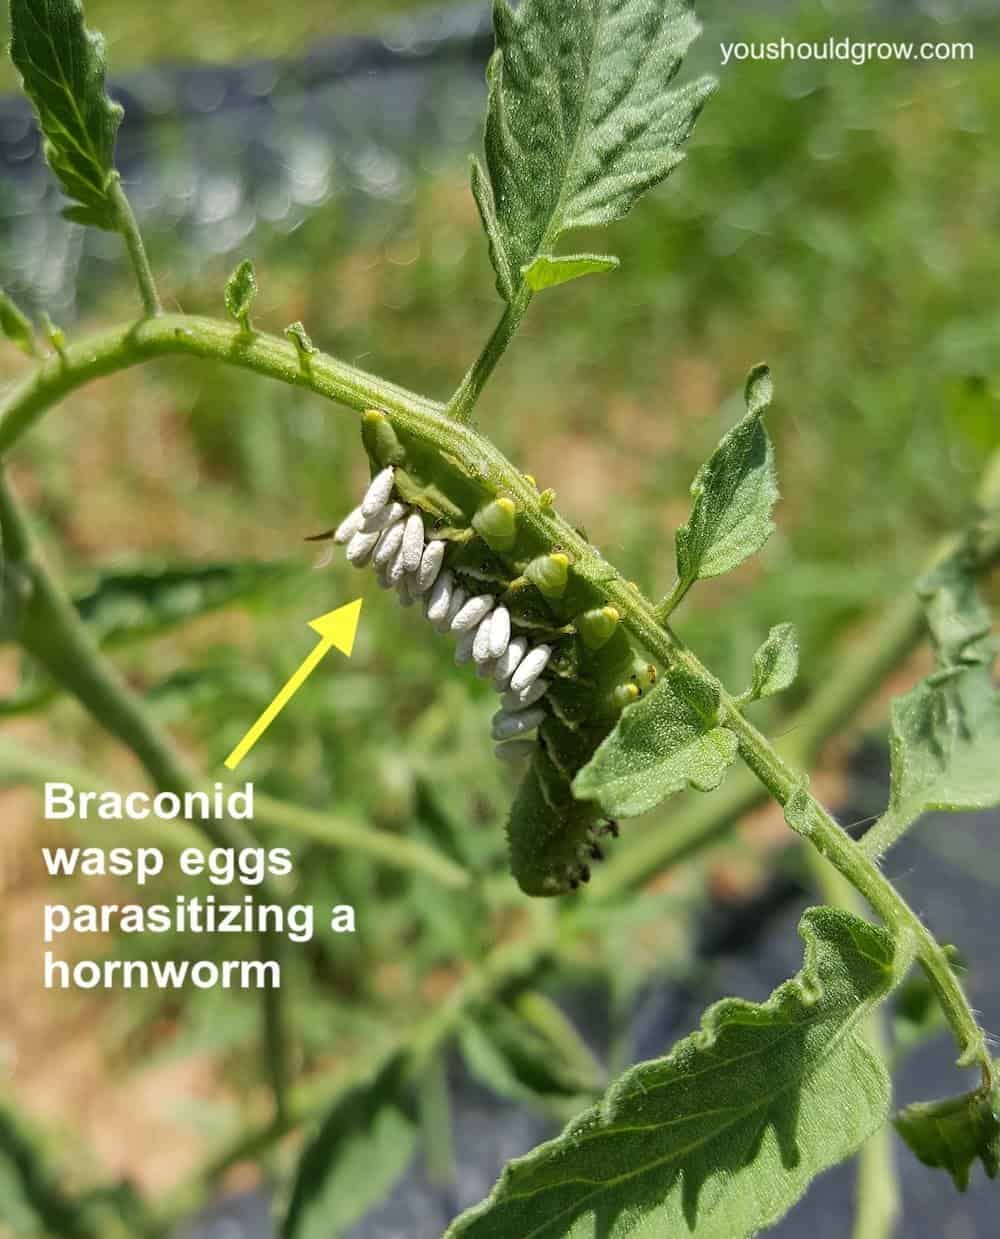 hornworm with braconid wasp eggs